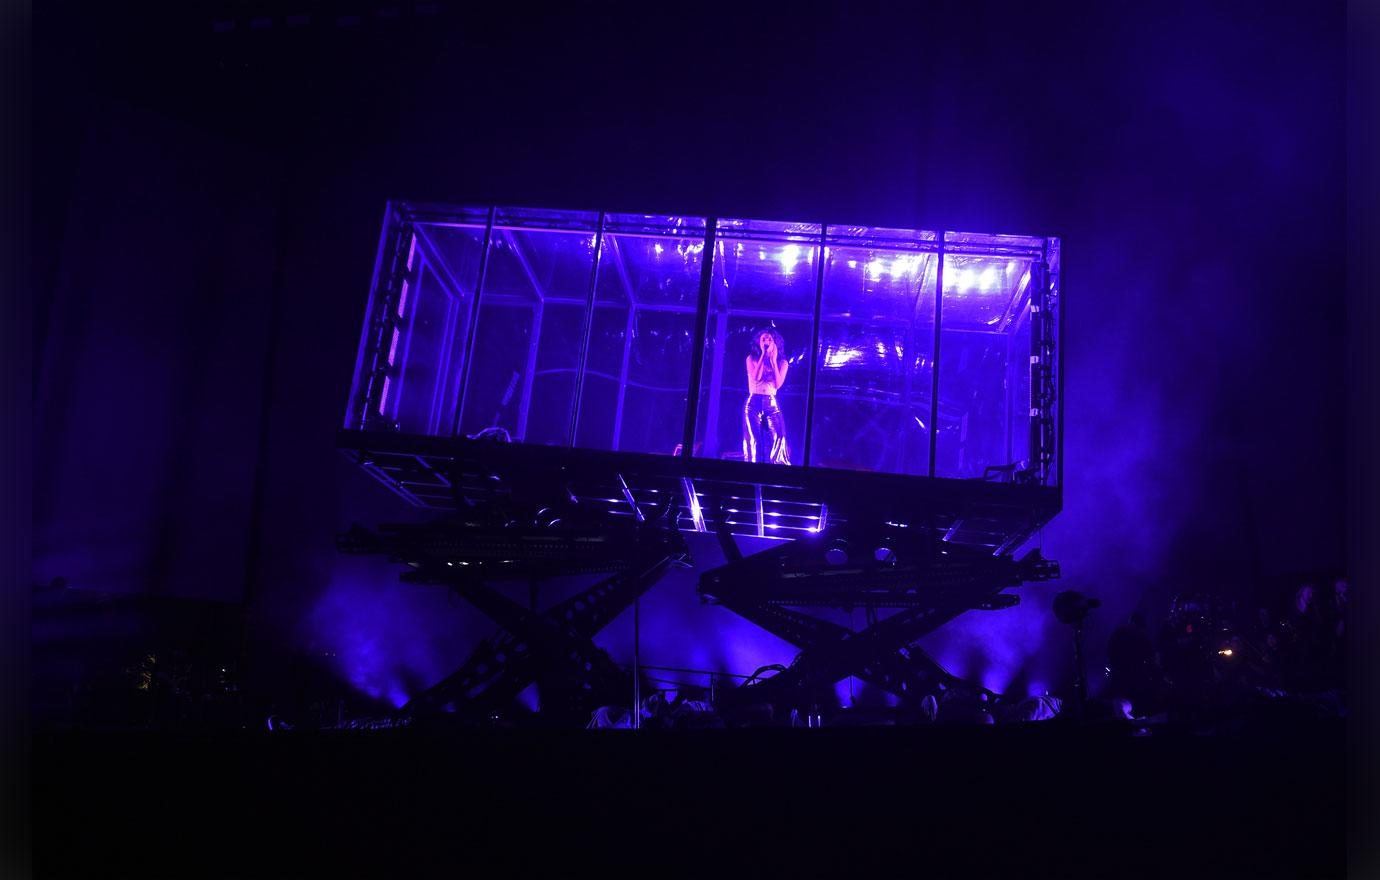 Lorde says Kanye & Kid Cudi stole her set design at Kids See Ghosts debut  show